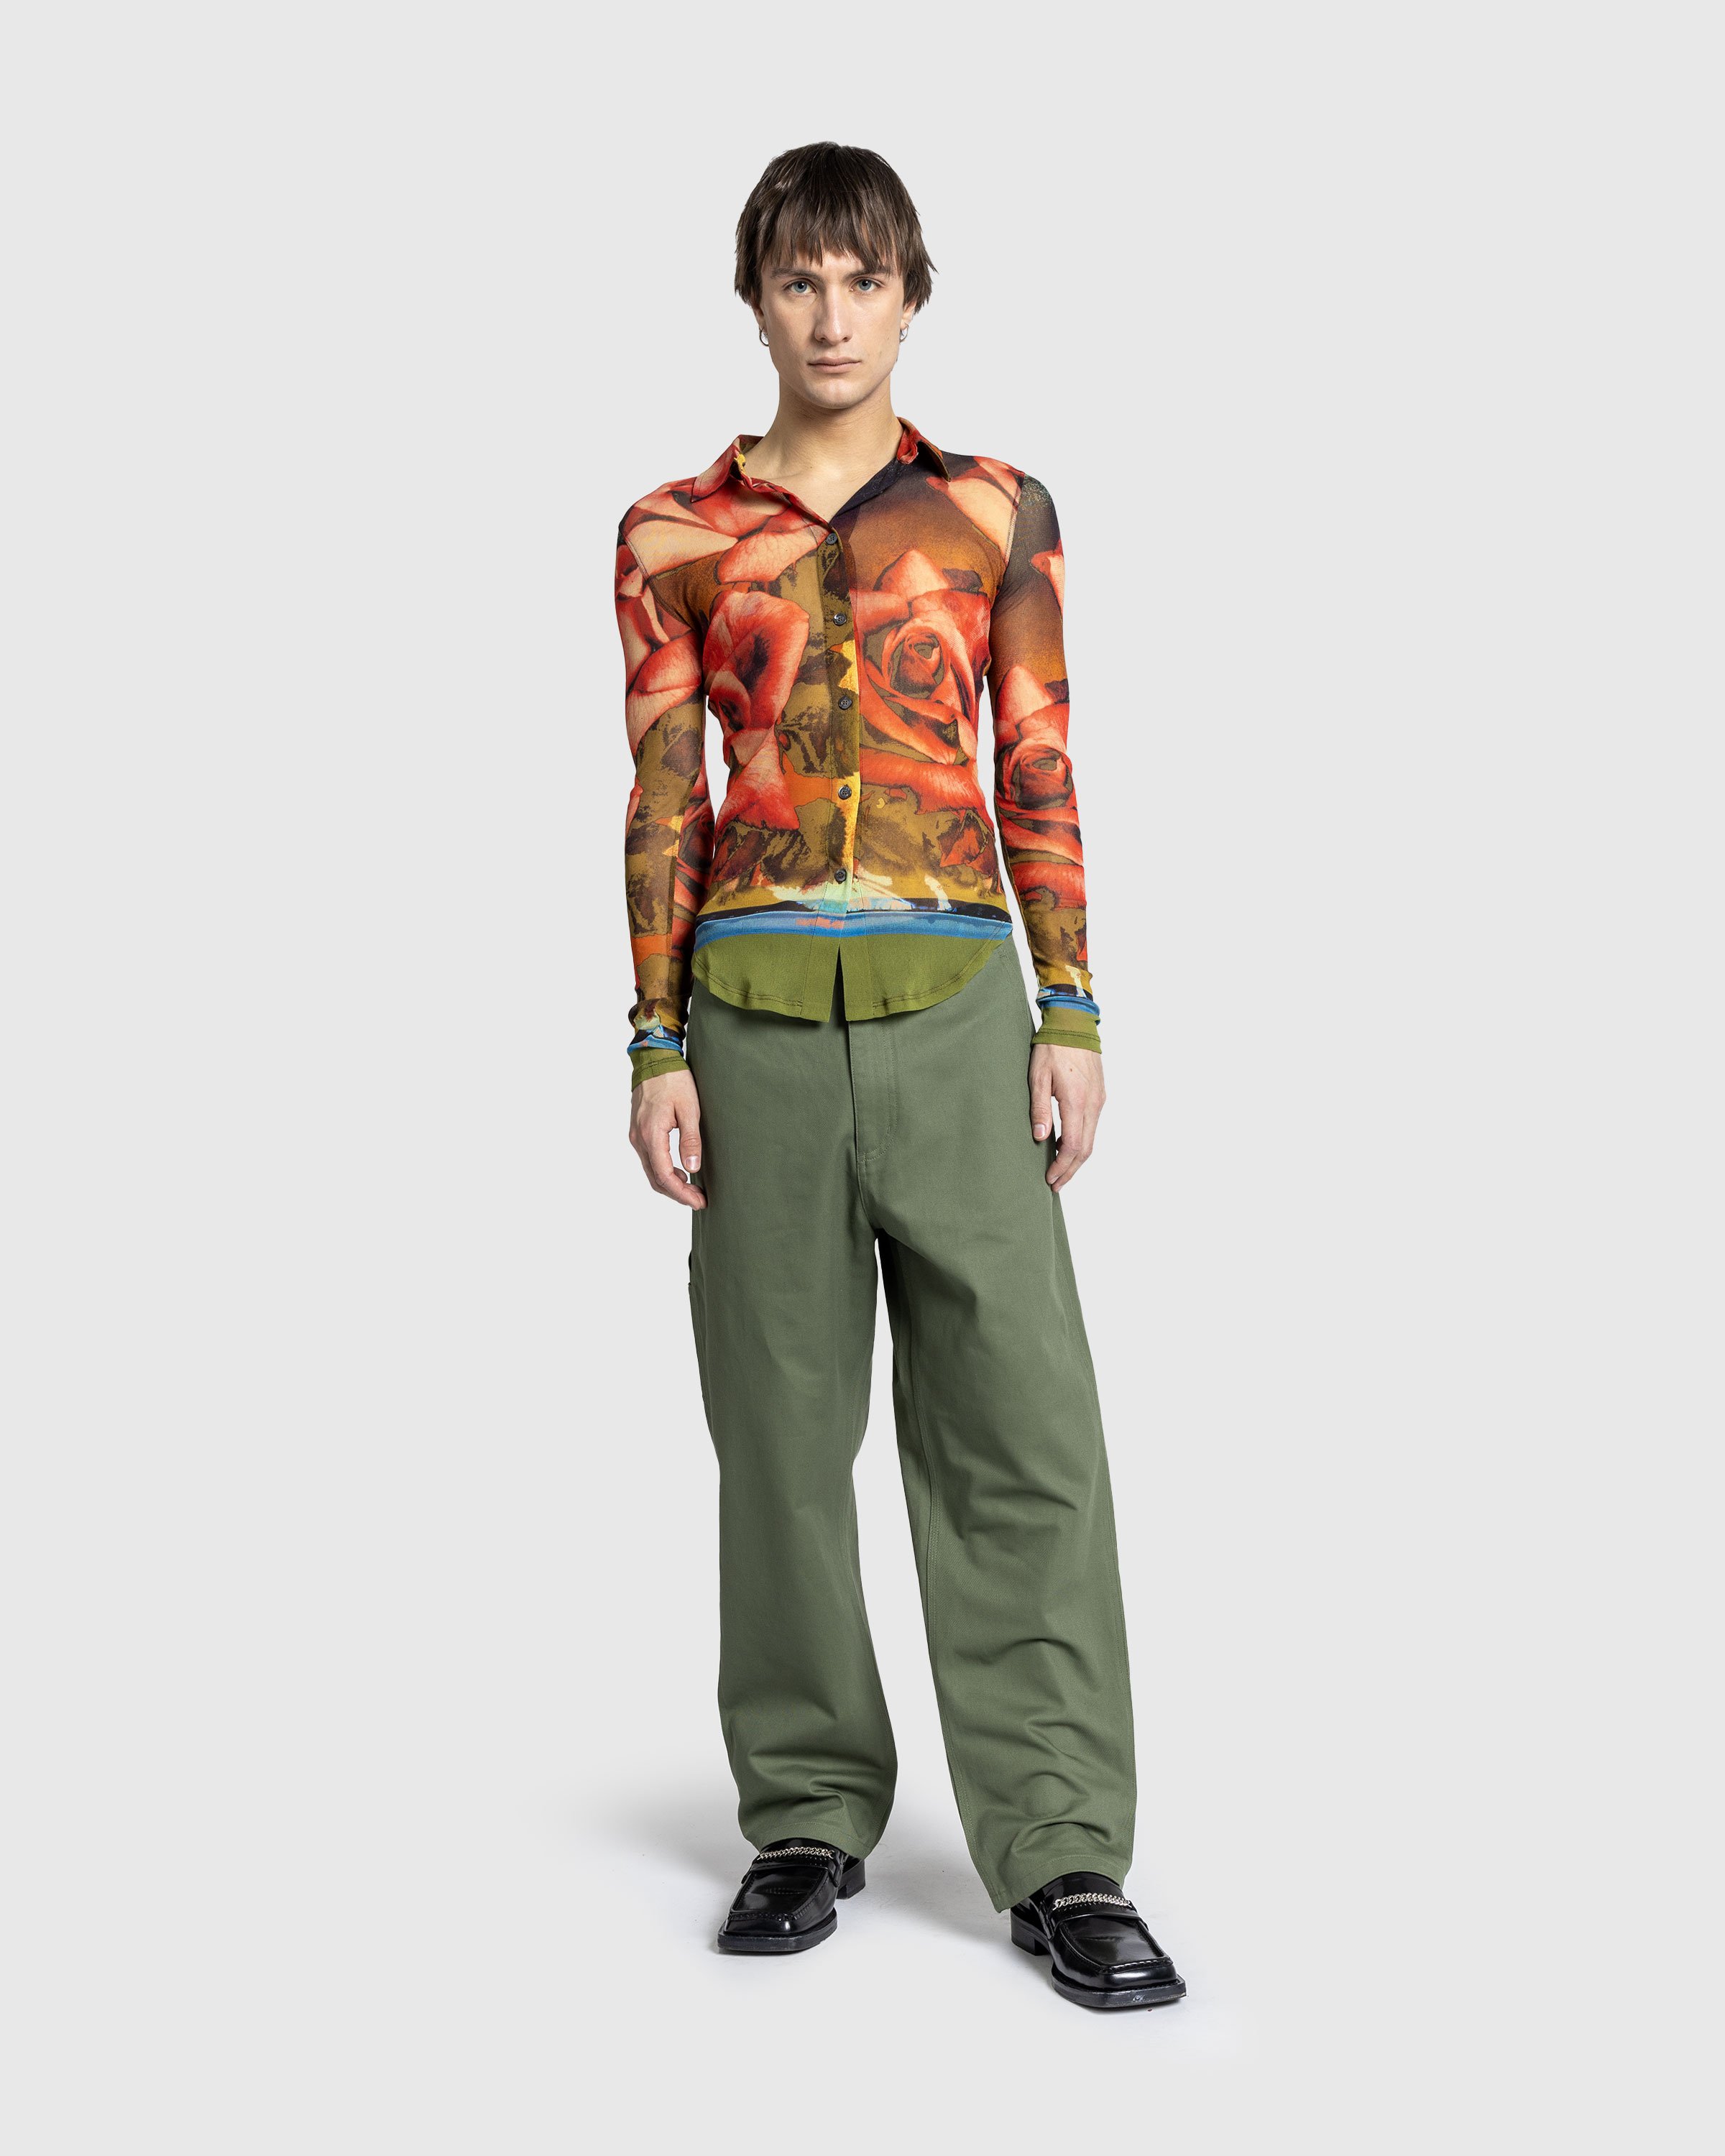 Jean Paul Gaultier - Mesh Long Sleeves Shirt Printed Roses Green/Red/Blue - Clothing - Multi - Image 3